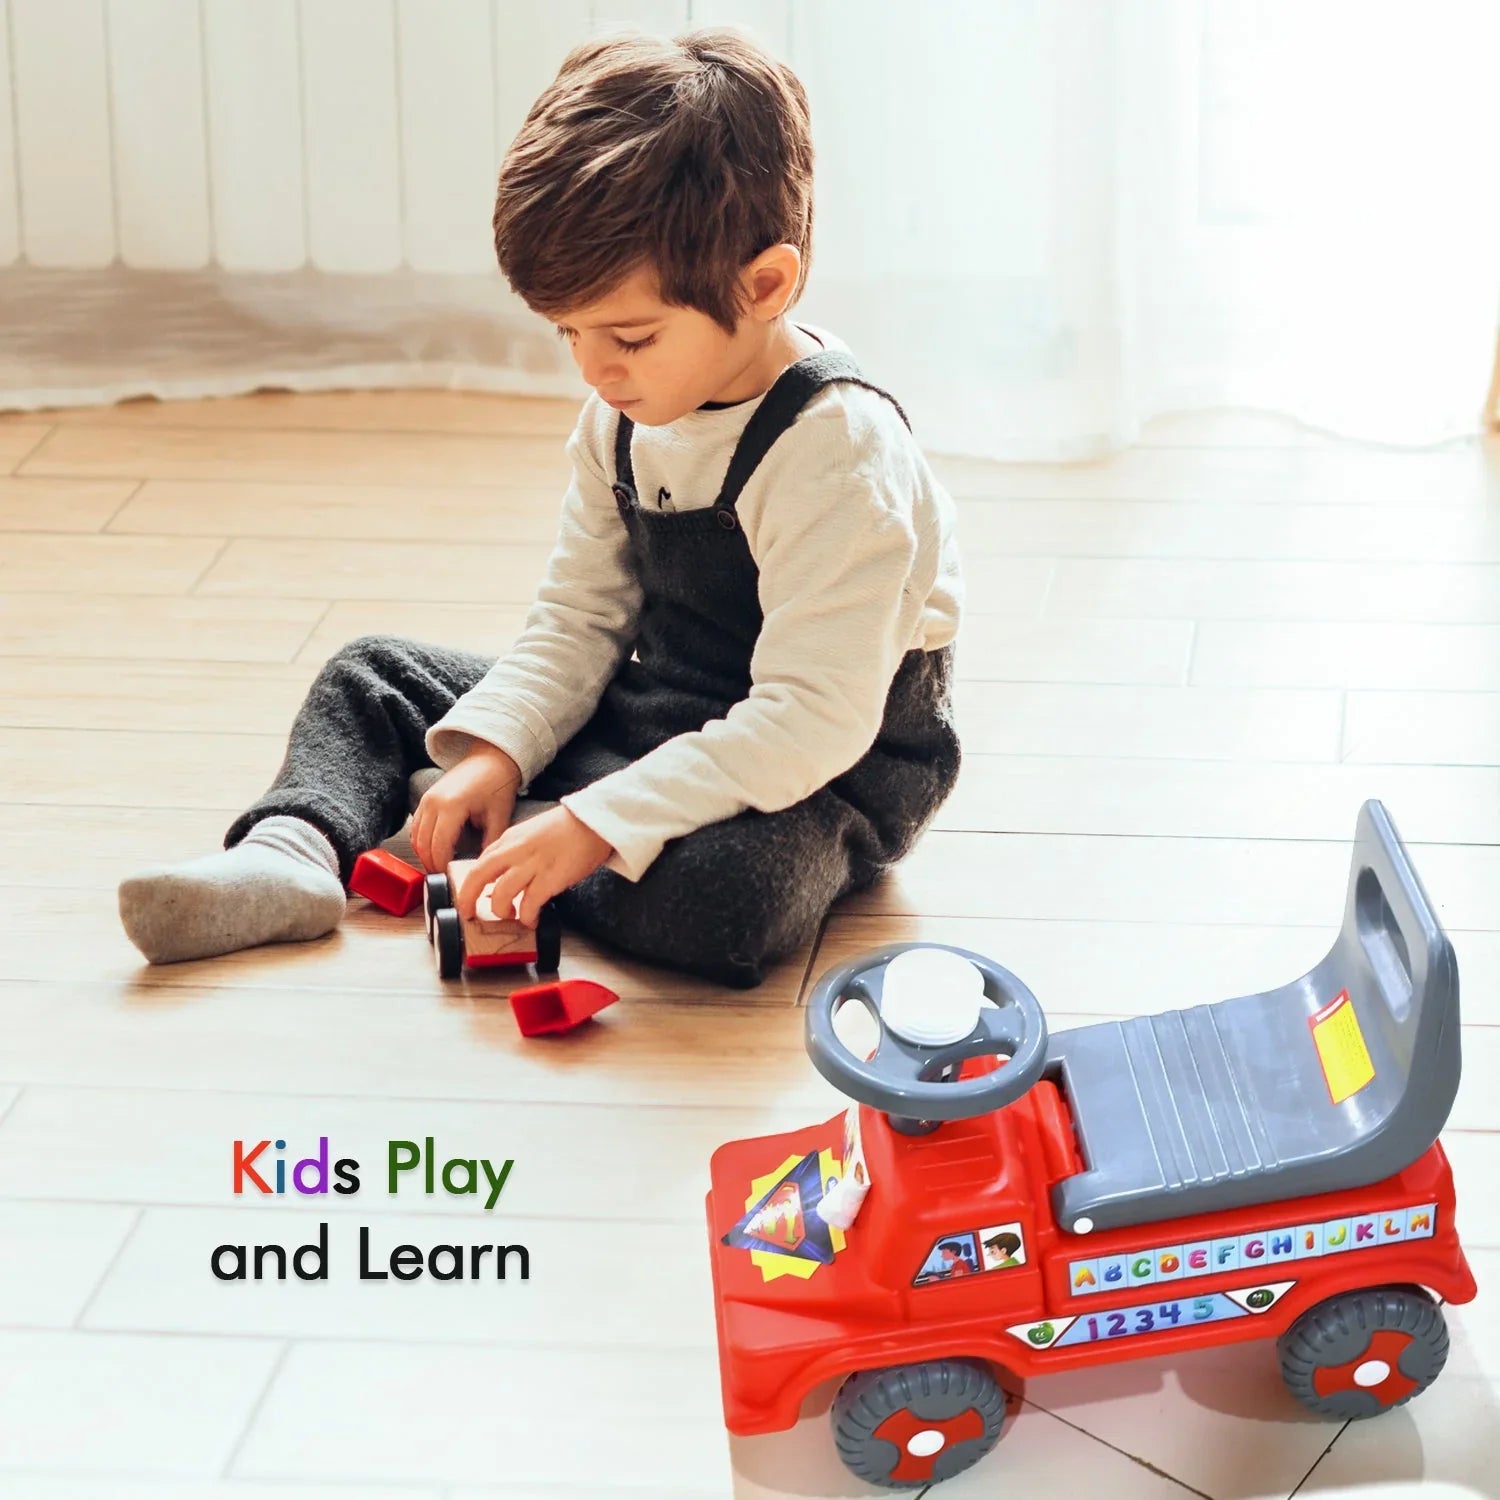 4323 Baby Ride on Push Car for Kids | Kids Baby Big Car Ride on Toy with Backrest Musical Horn For Children Kids Toy Ride-on, Truck, Etc Suitable for Kids Boys/Girls  | Ride on Baby Car for Kids to Drive Boys, Girls